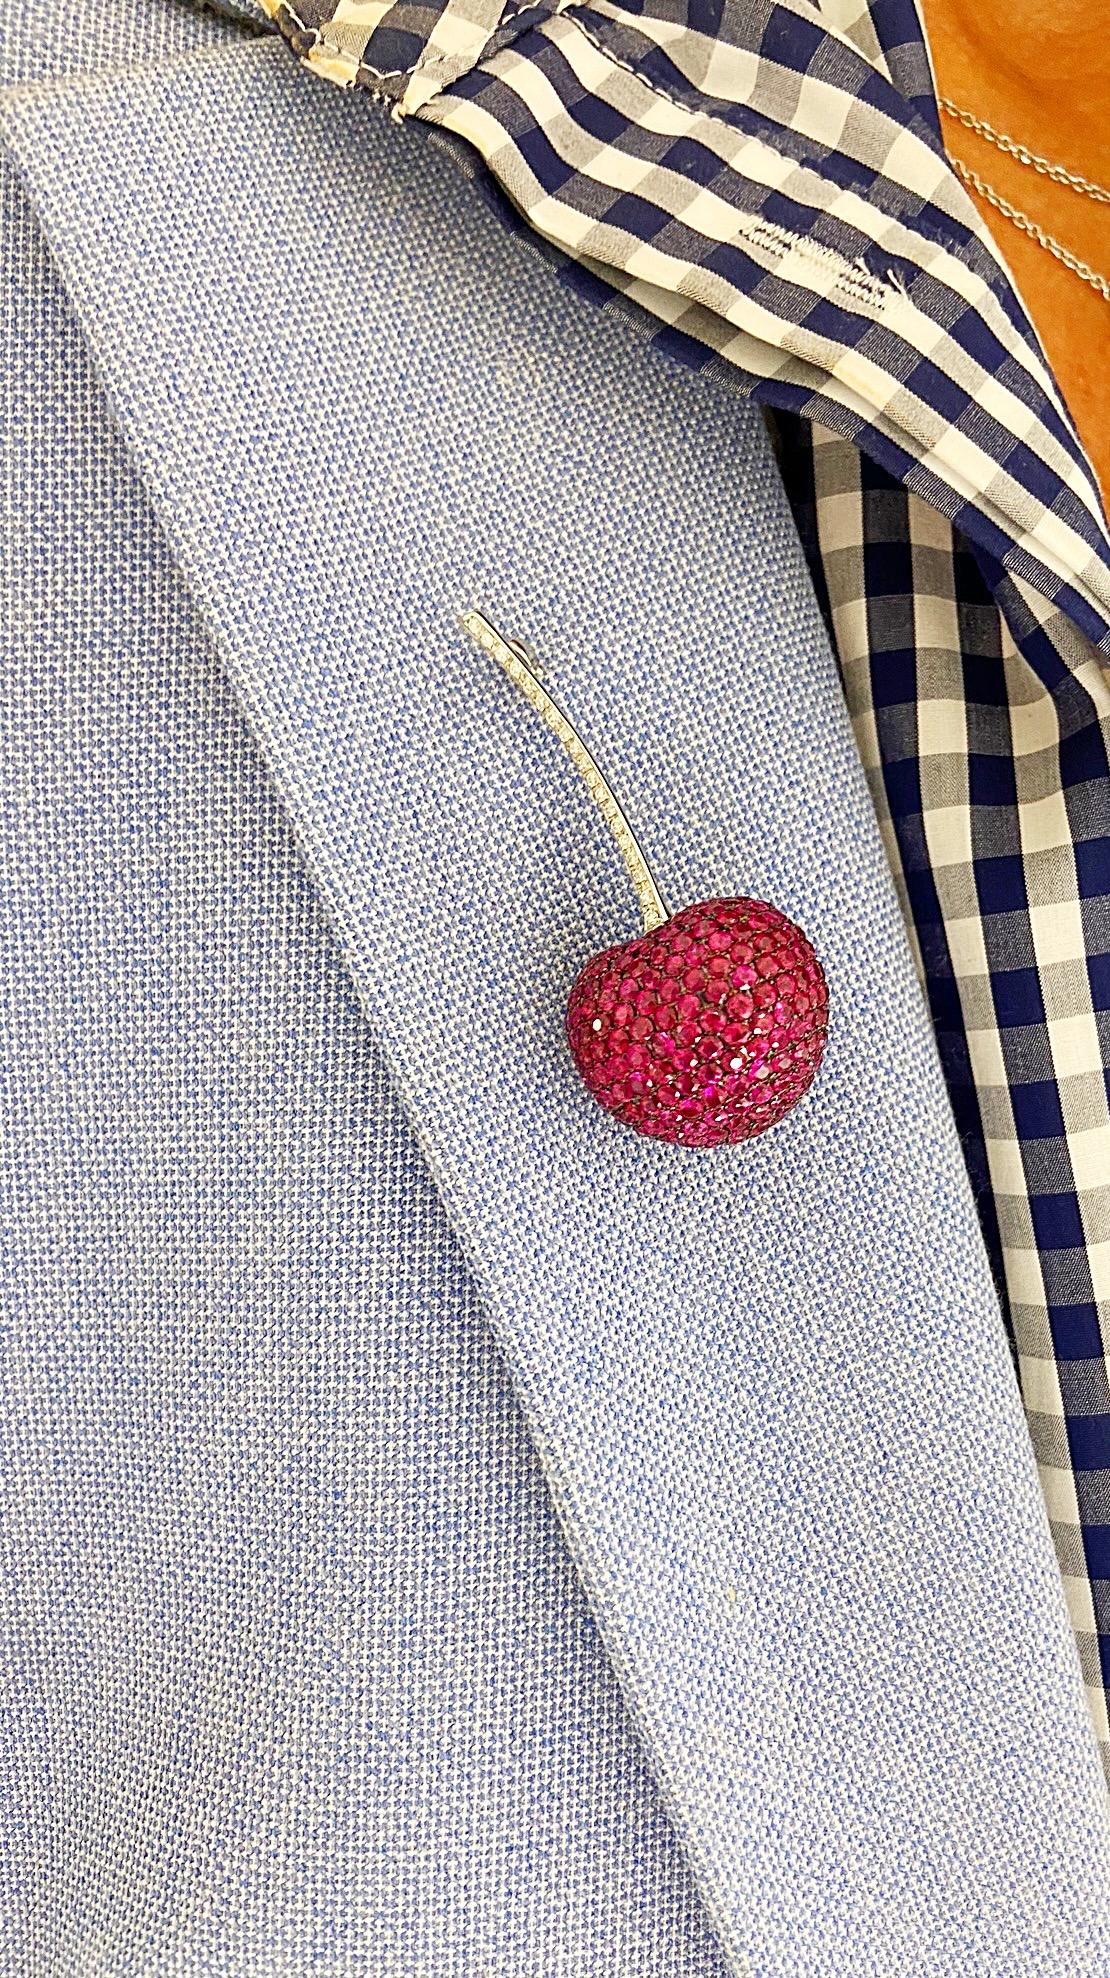 Made exclusively for Cellini Jewelers NYC .This lovely 18 karat white gold cherry brooch is meticulously set with round Rubies for the fruit & round Diamonds for the stem. The cherry measures 2